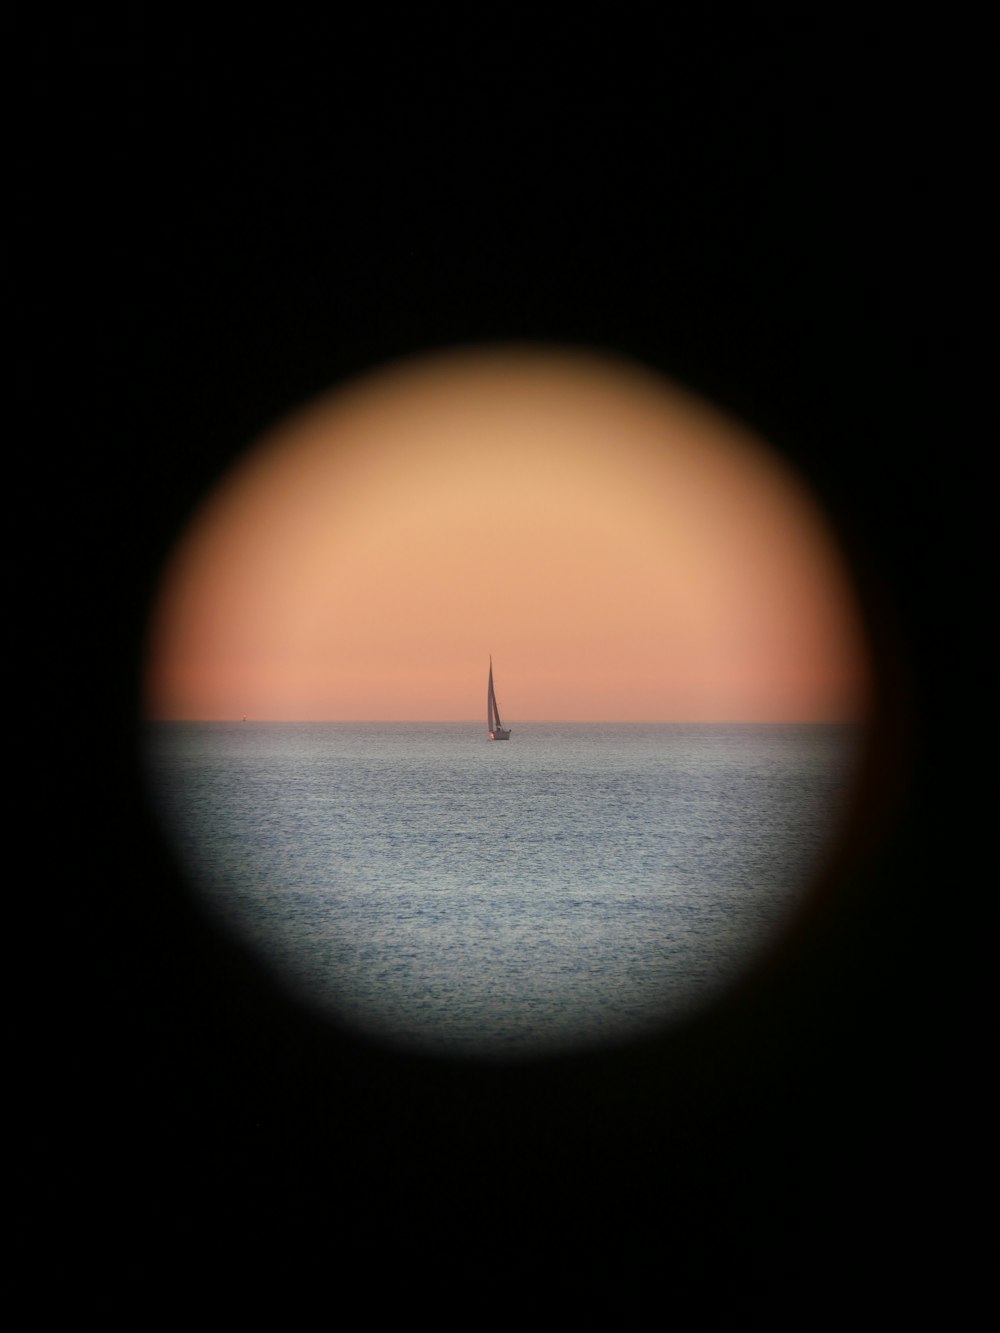 a view of a sailboat out in the ocean